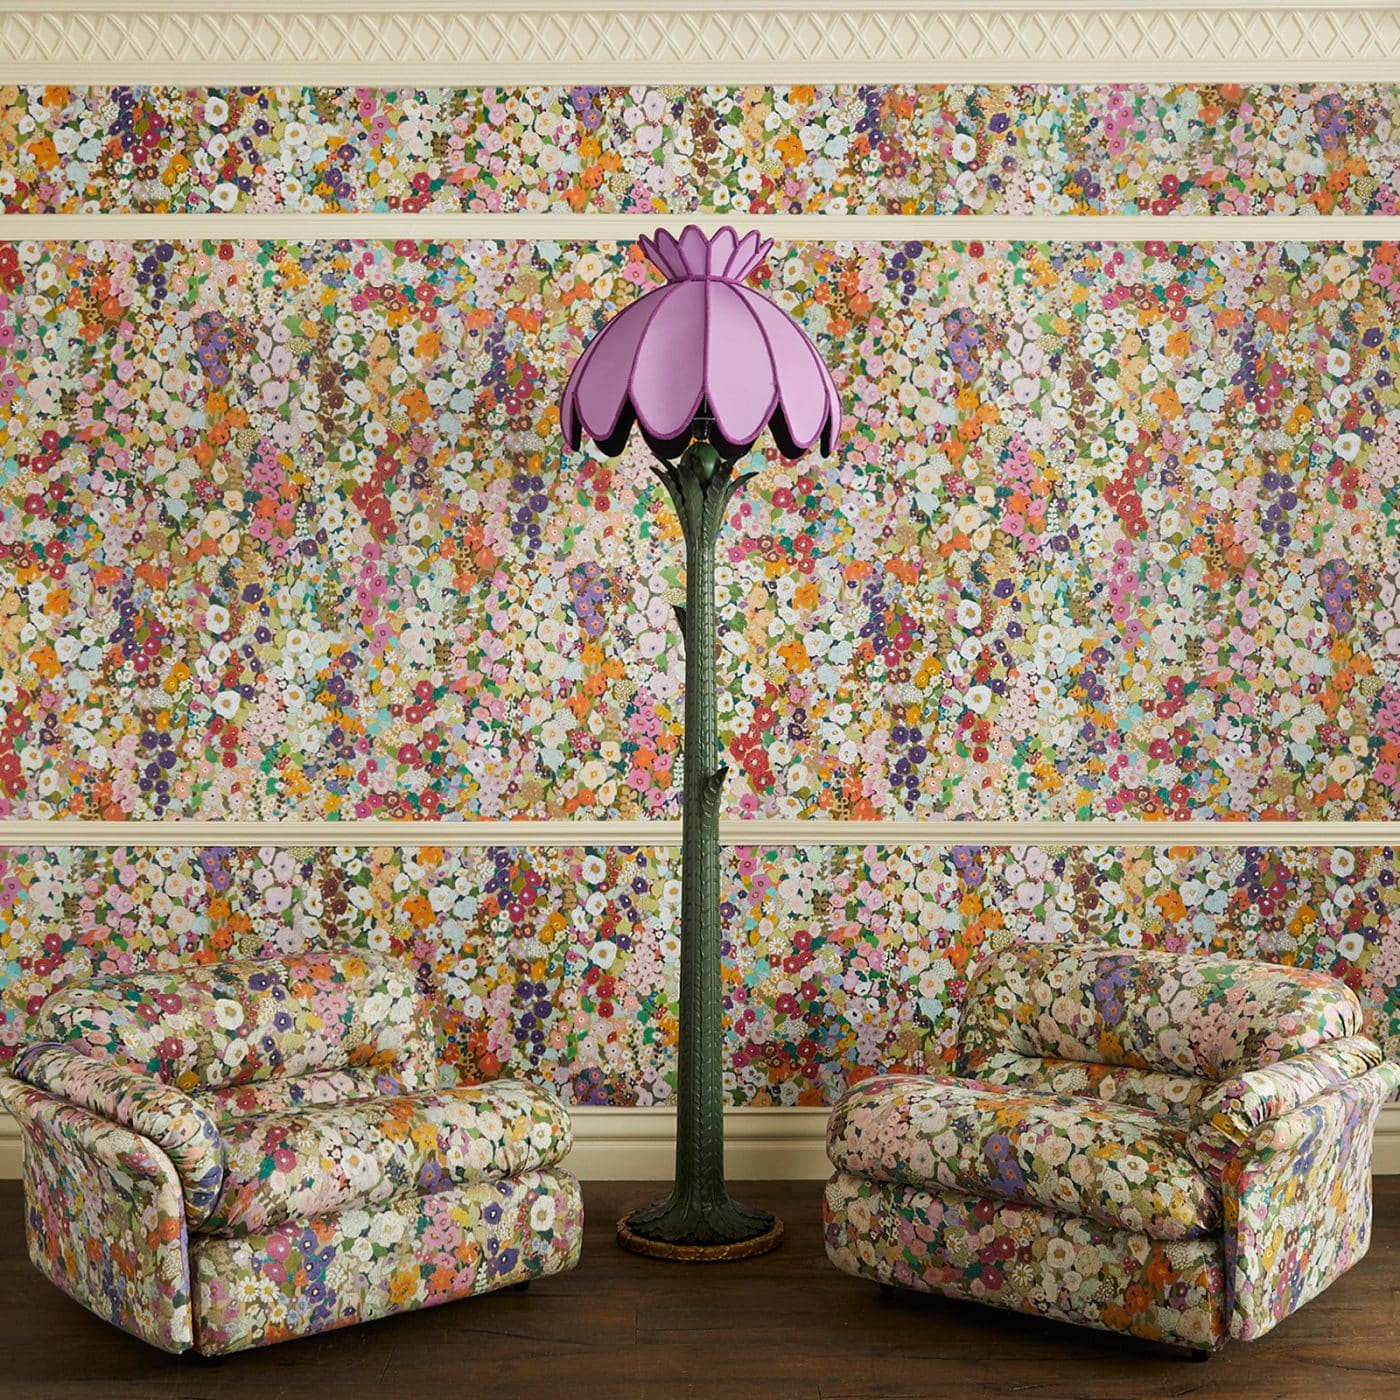 House of Hackney's green Acanthus floor lamp with a purple shade, flanked by two seats covered in the brand's Hollyhocks print in front a wall papered with the same pattern